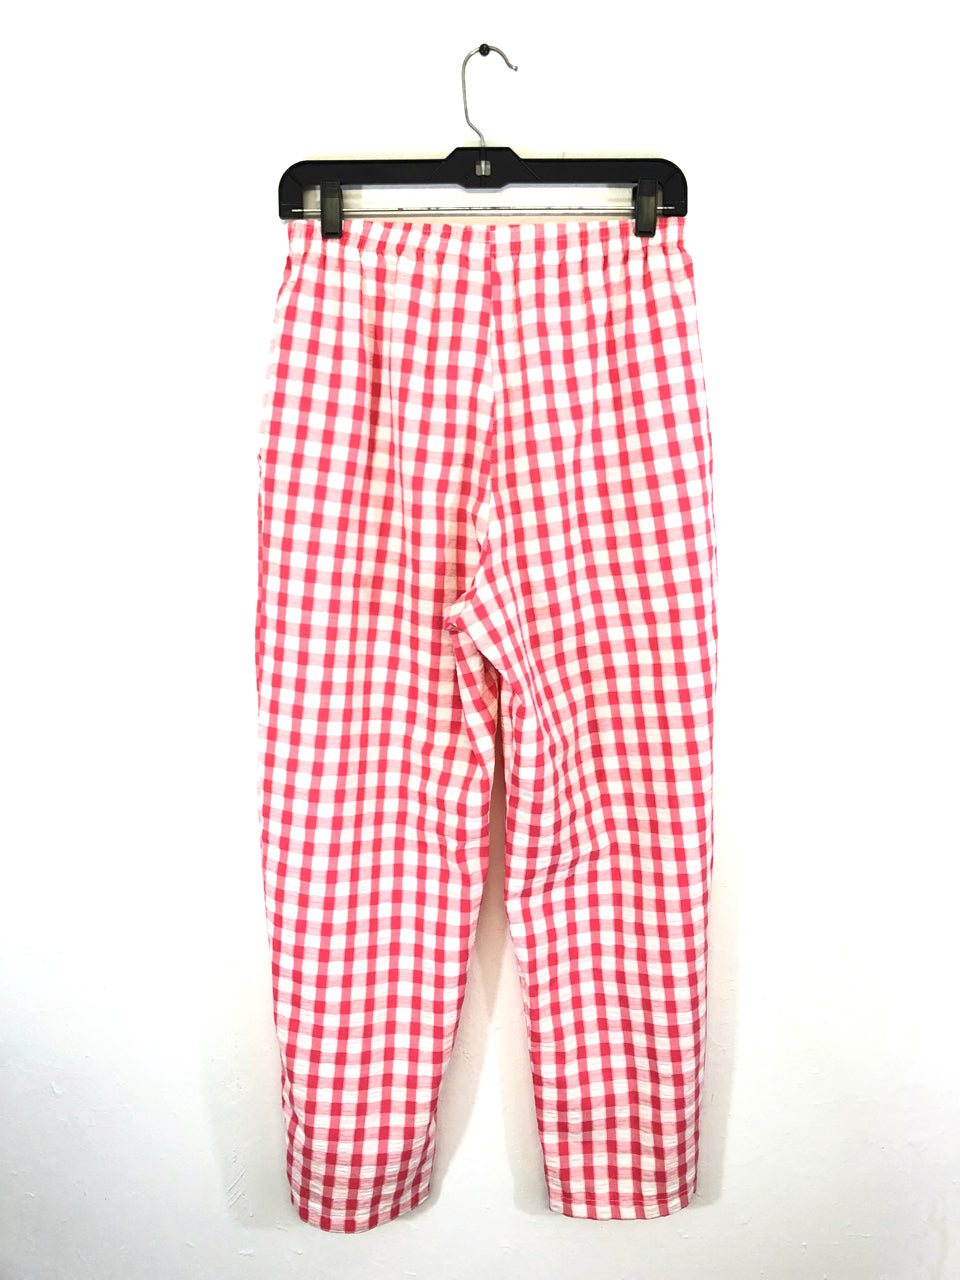 Andrew McMullan Pink Gingham Pants